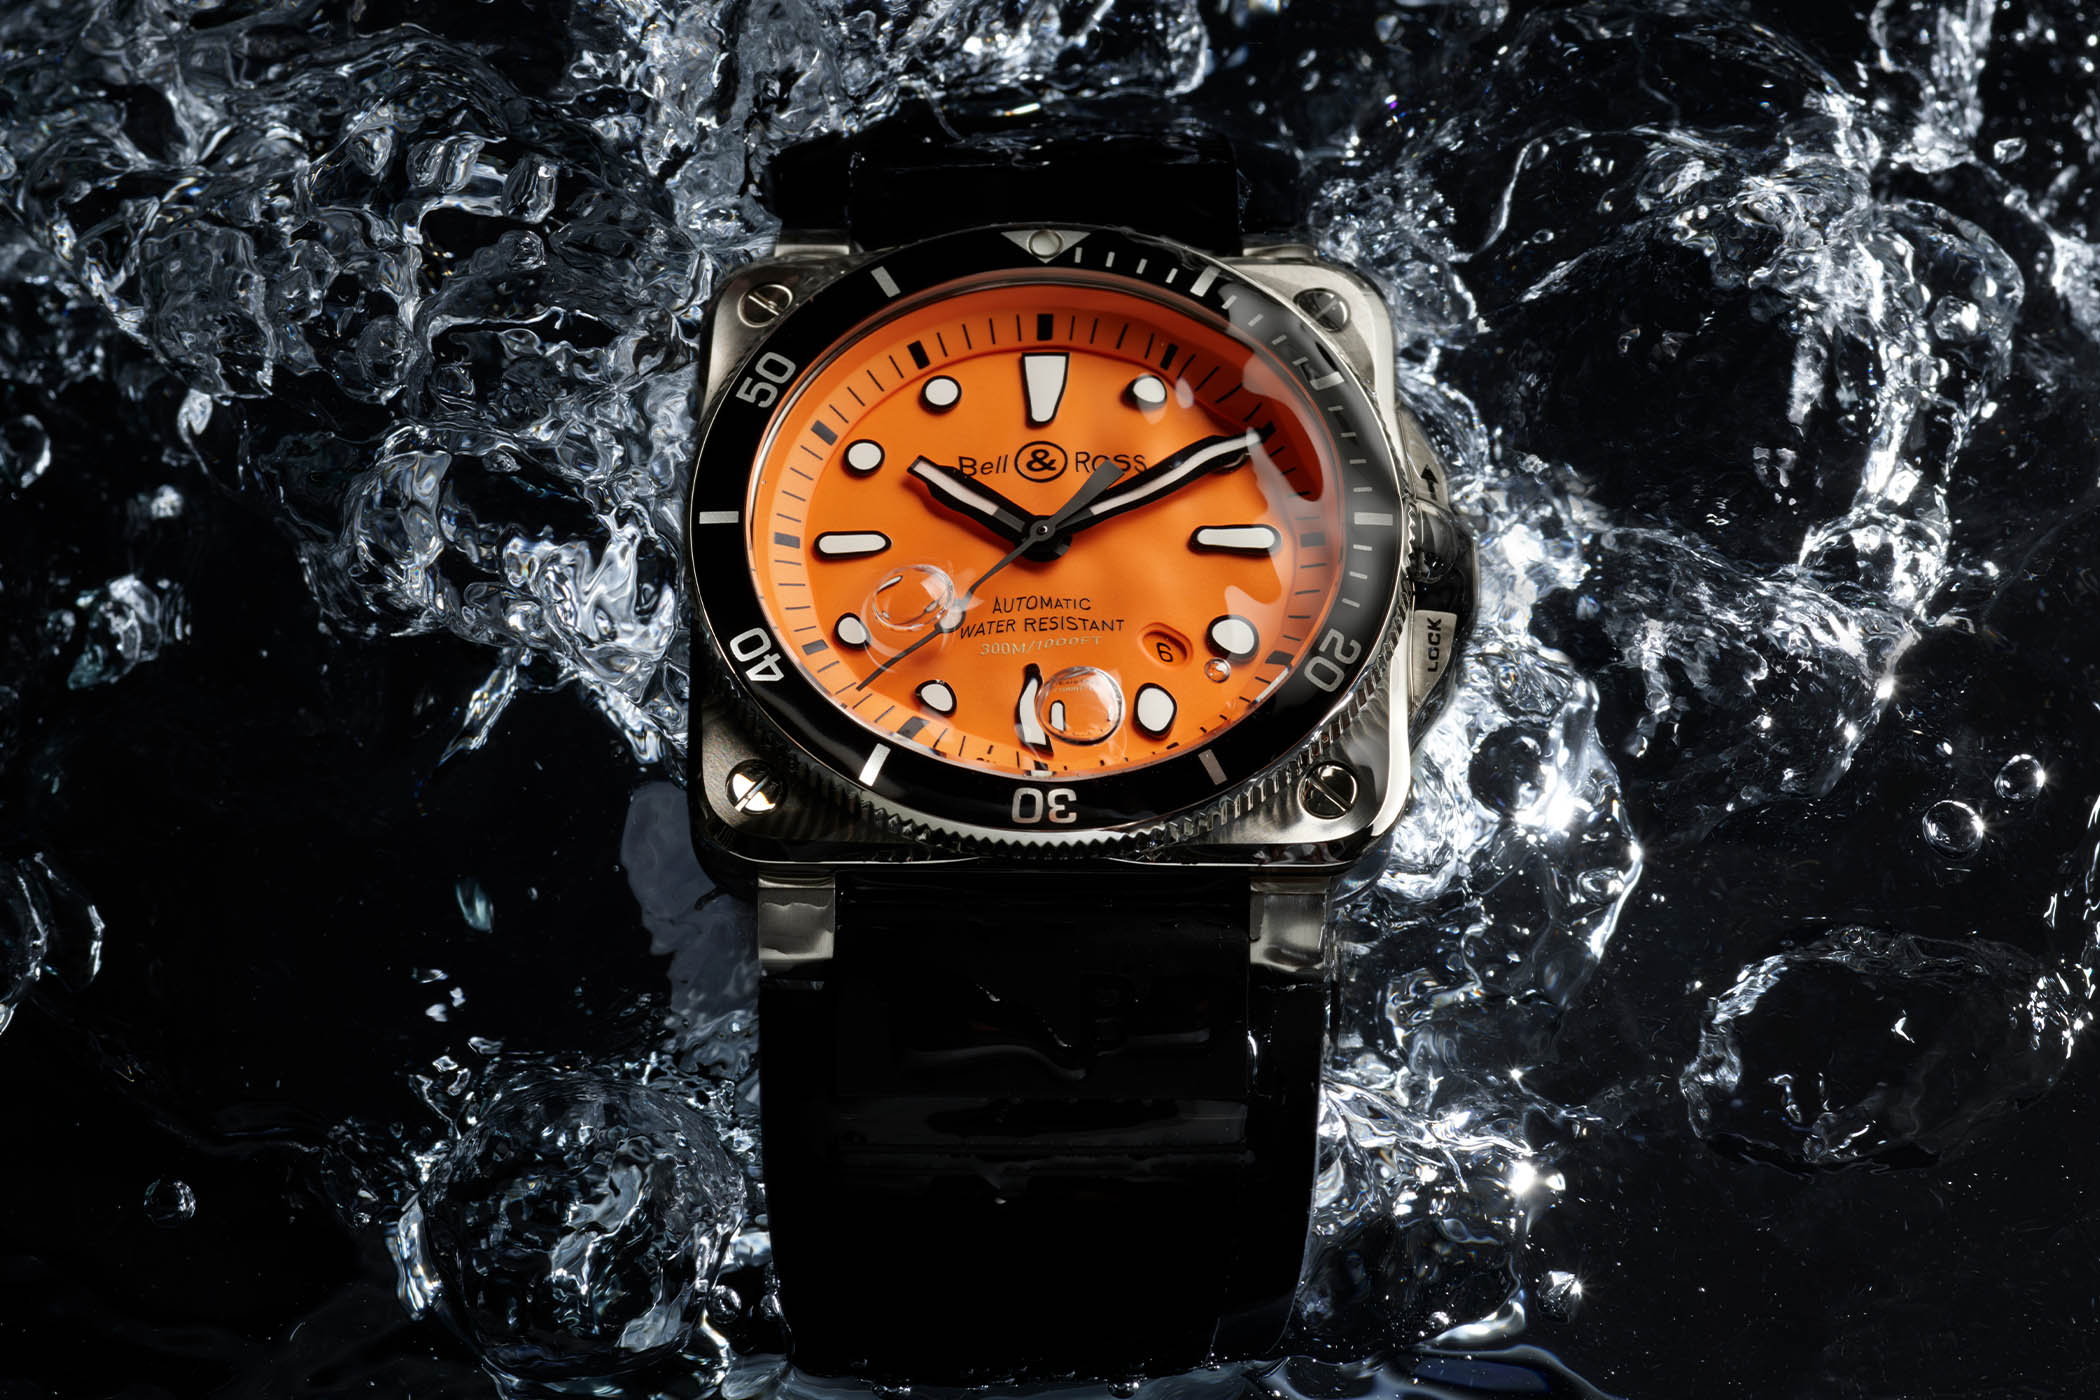 The stainless steel case fake watch is water resistant.